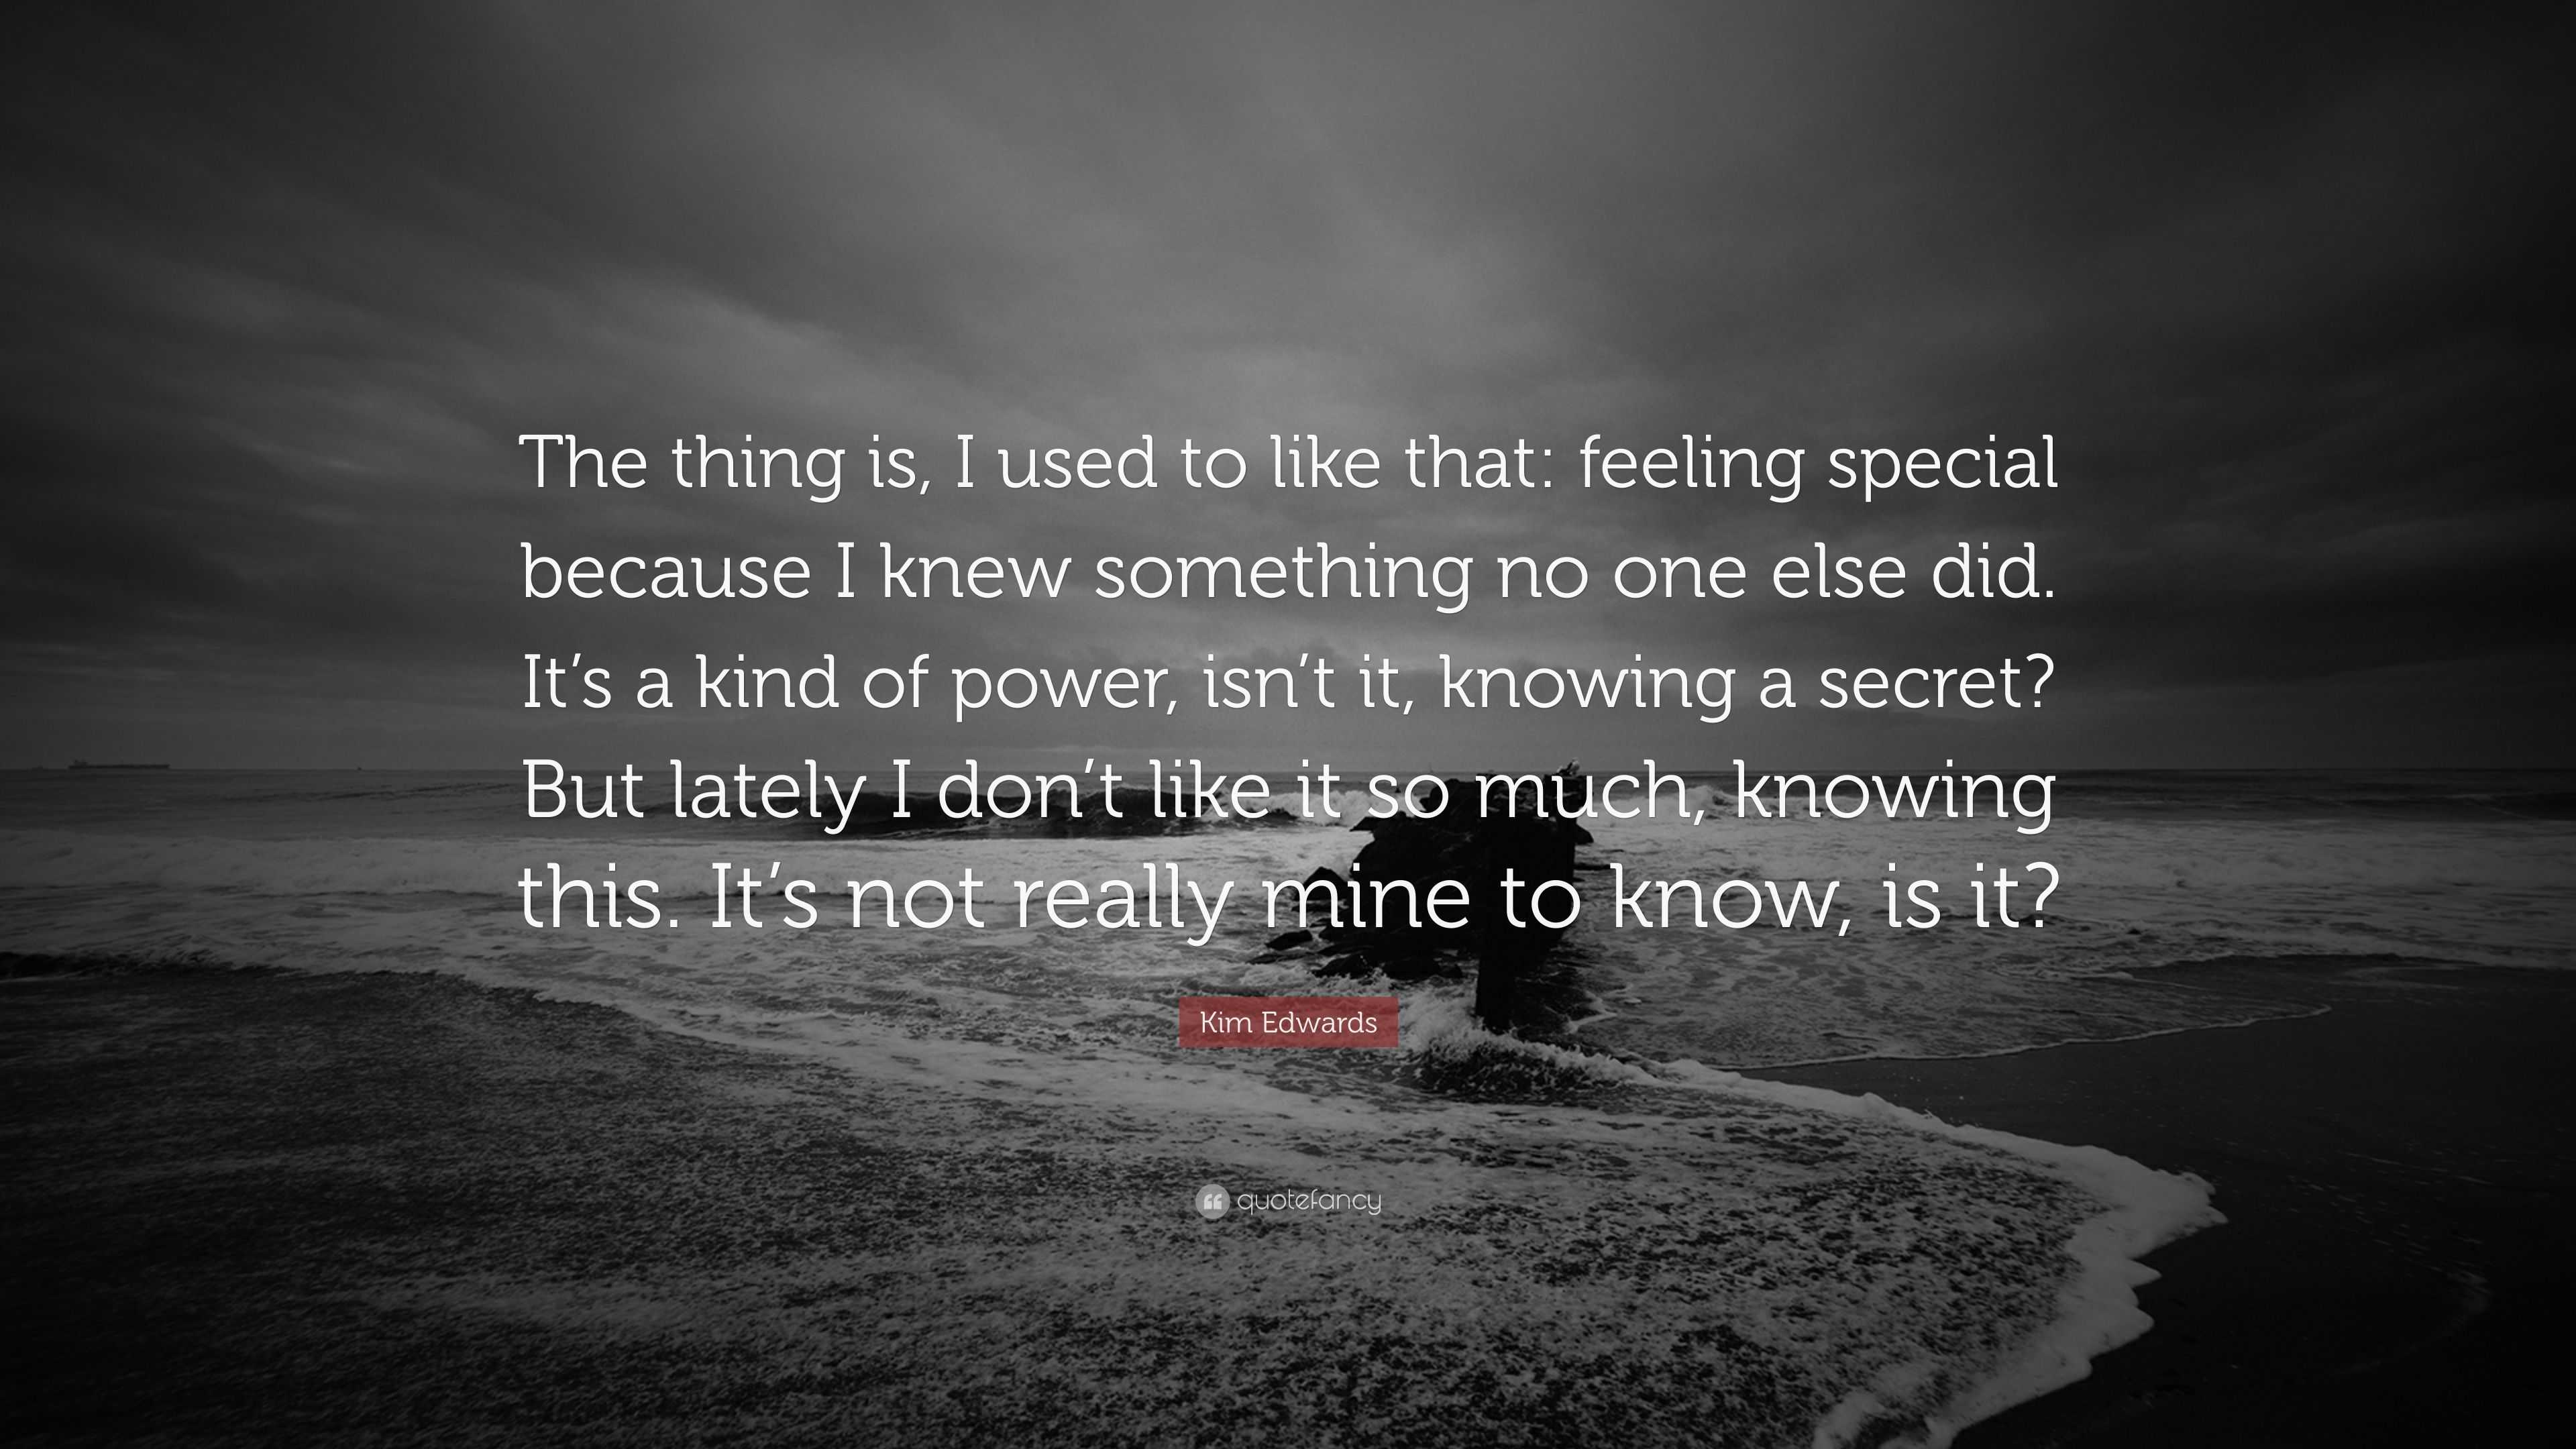 Kim Edwards Quote: “The thing is, I used to like that: feeling special ...